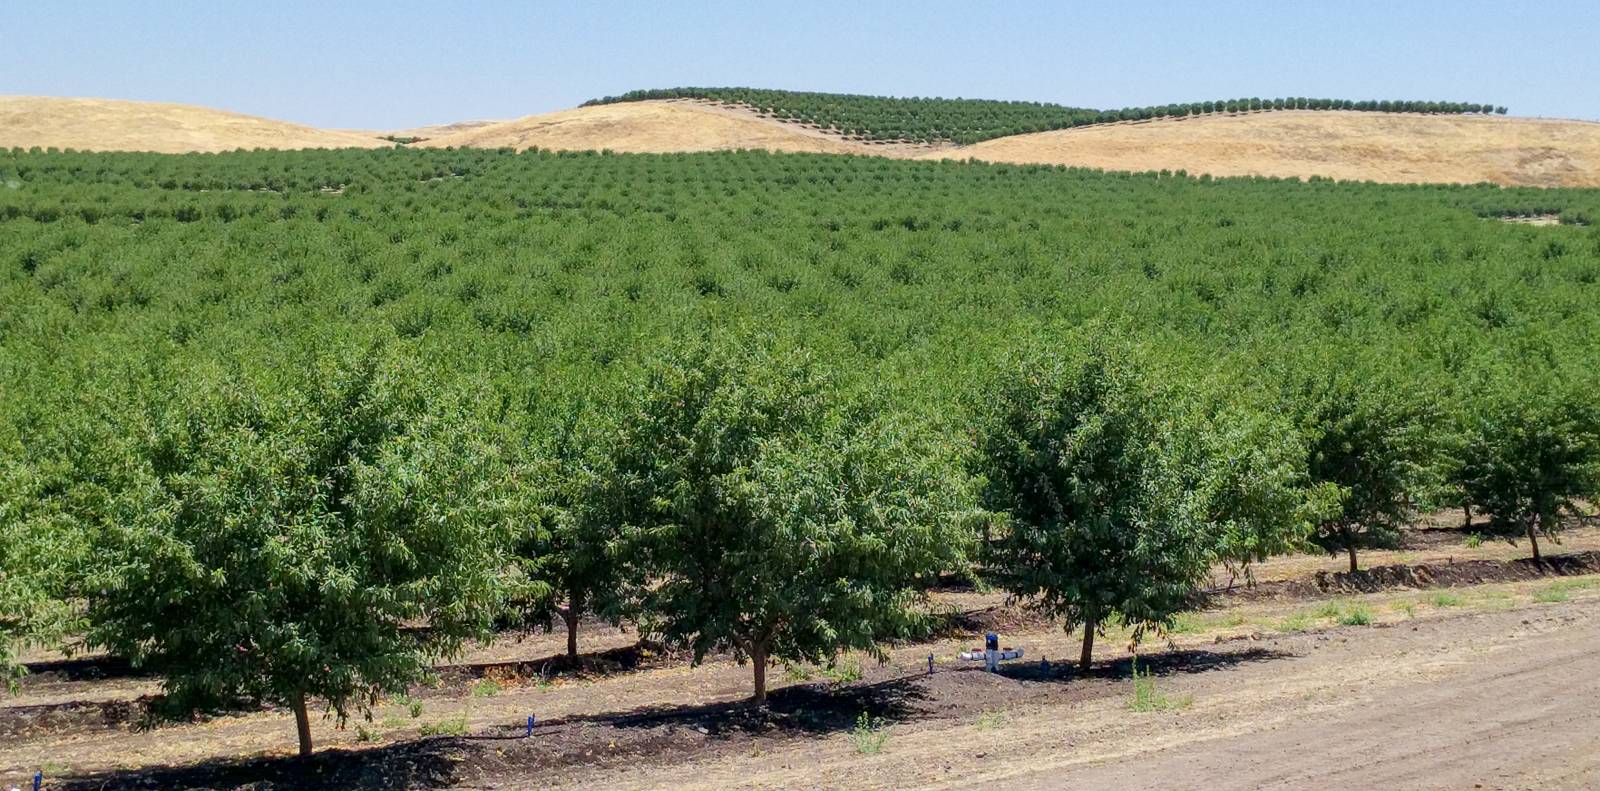 Almond orchards in Stanislaus County. Analyzing land ownership distribution in California by crop type and property size can help scientists and extension professionals shape research programs according to the needs of local growers.